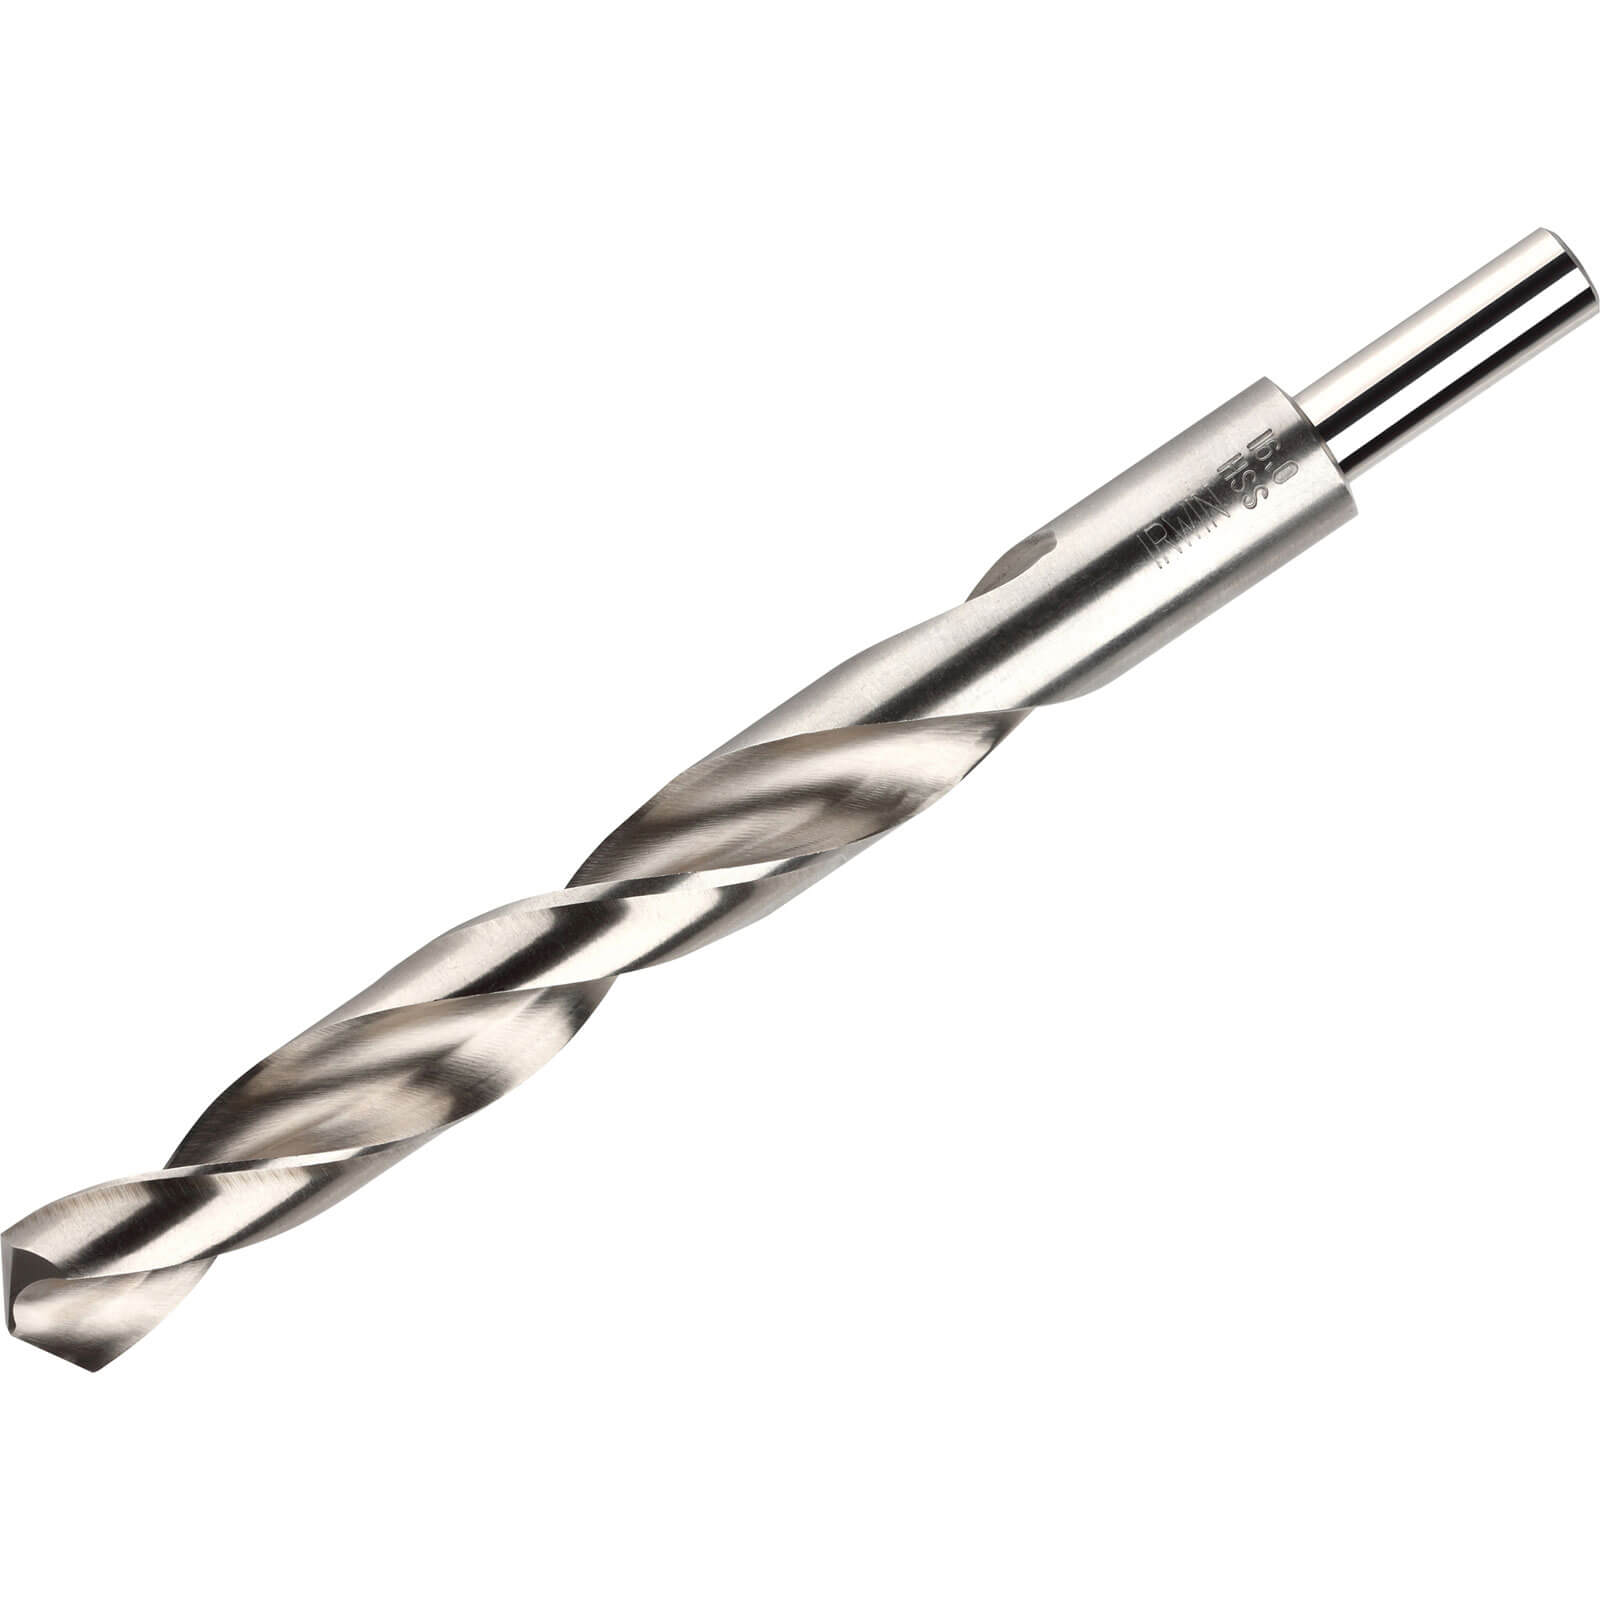 Photo of Irwin Hss Pro Drill Bits 12mm Pack Of 1